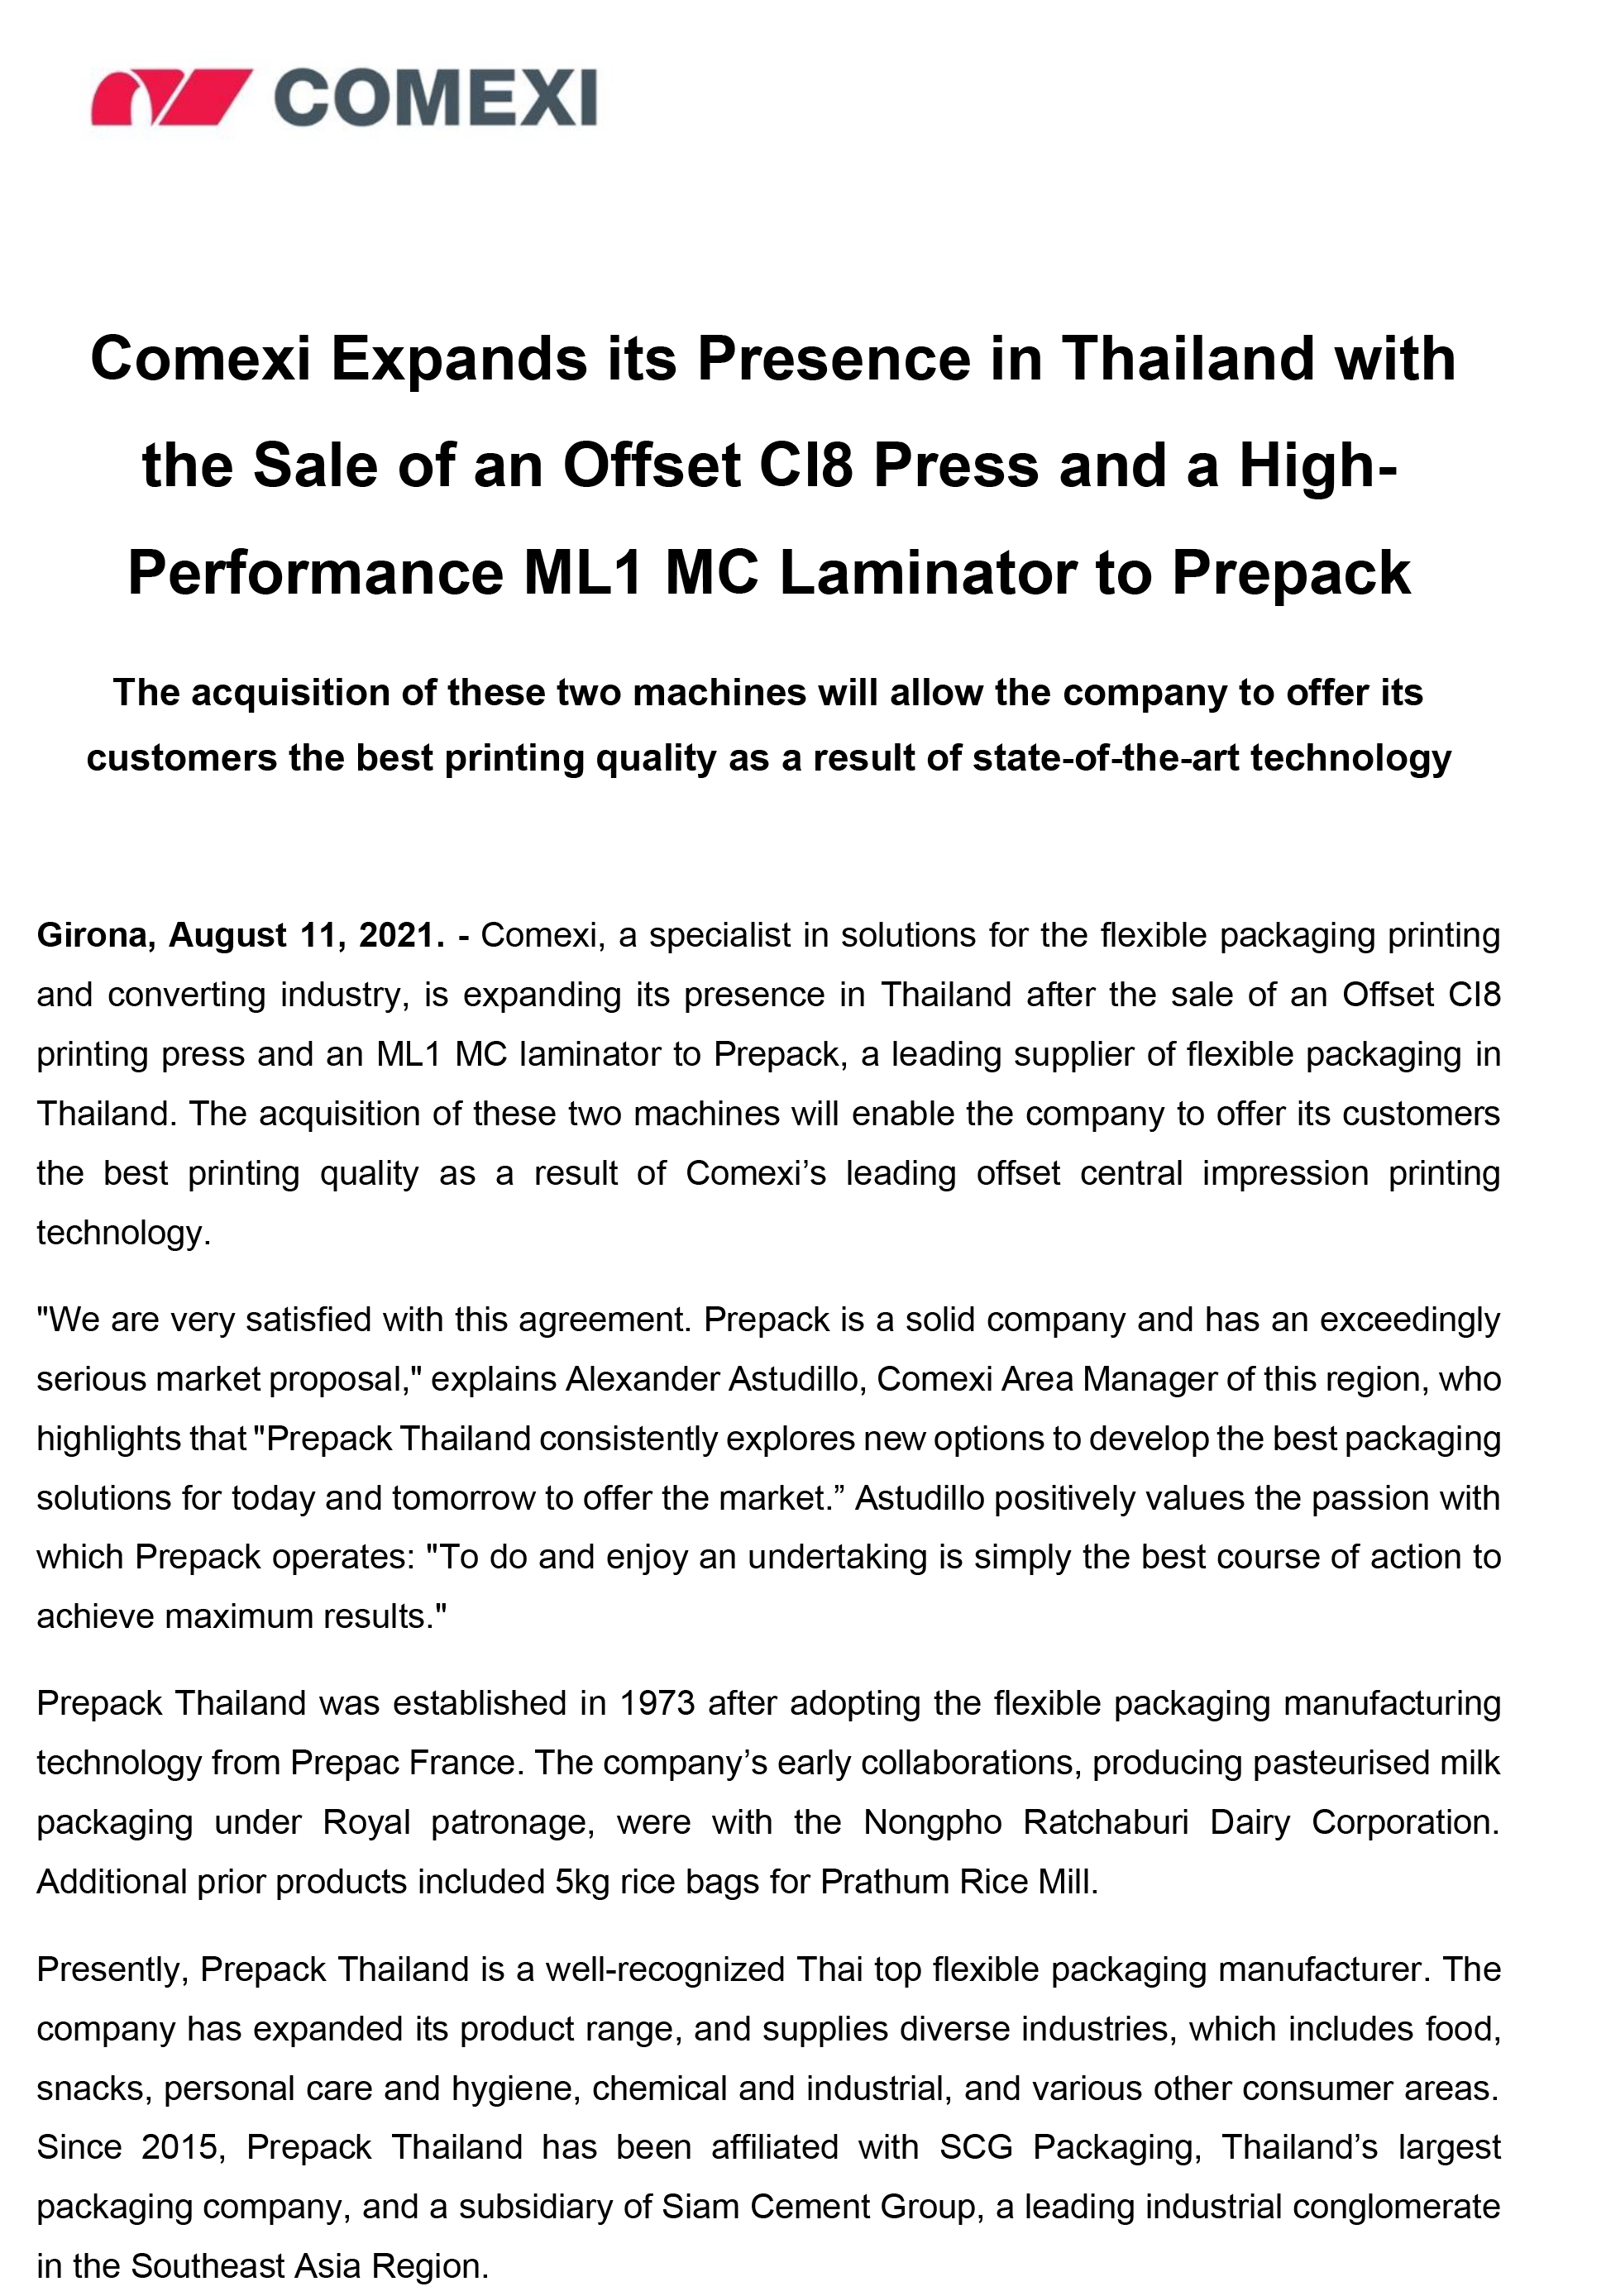 Comexi Expands its Presence in Thailand with the Sale of an Offset CI8 Press and a High-Performance ML1 MC Laminator to Prepack